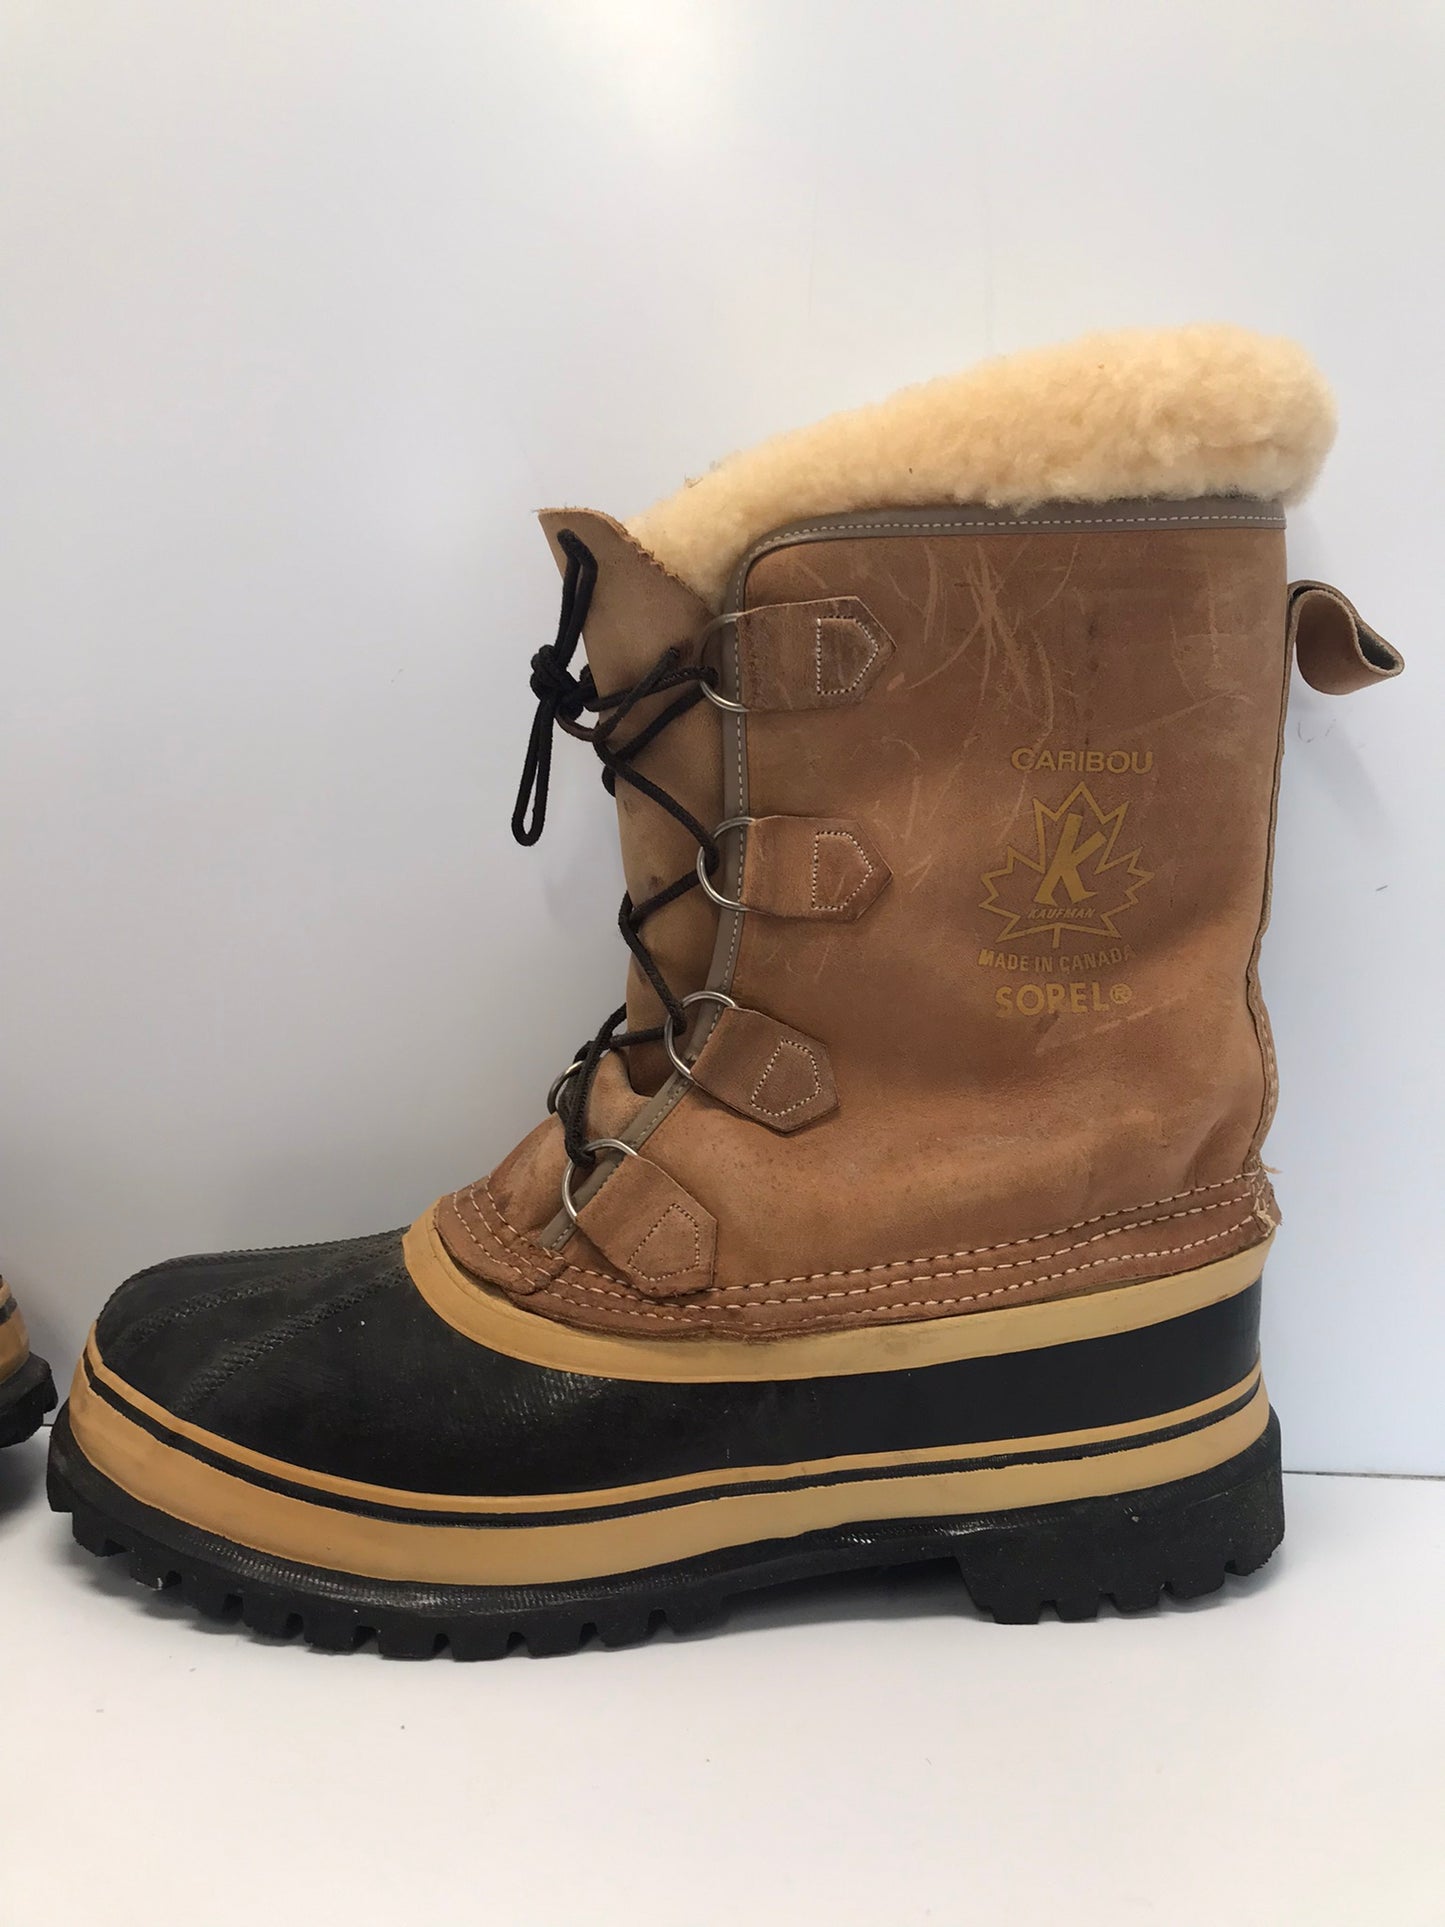 Winter Boots Men's Size 9 Sorel With Liner Leather